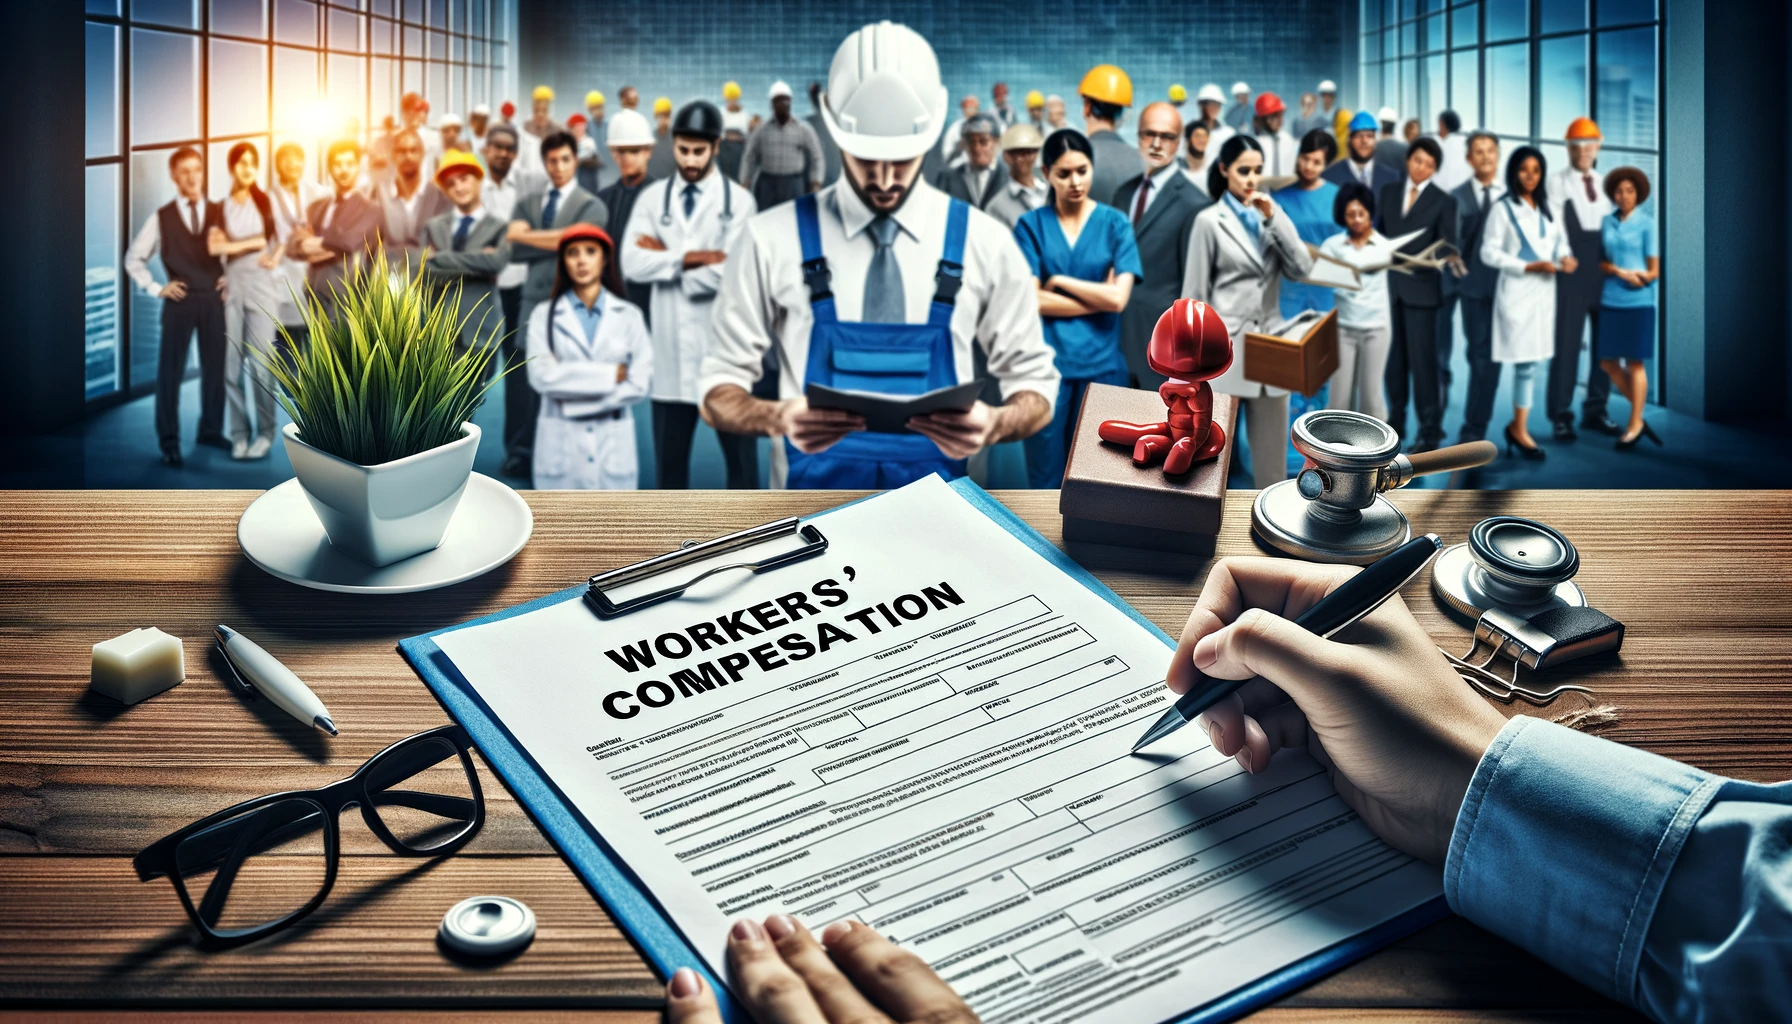 An image depicting workers compensation based on state laws to ensure compliance.